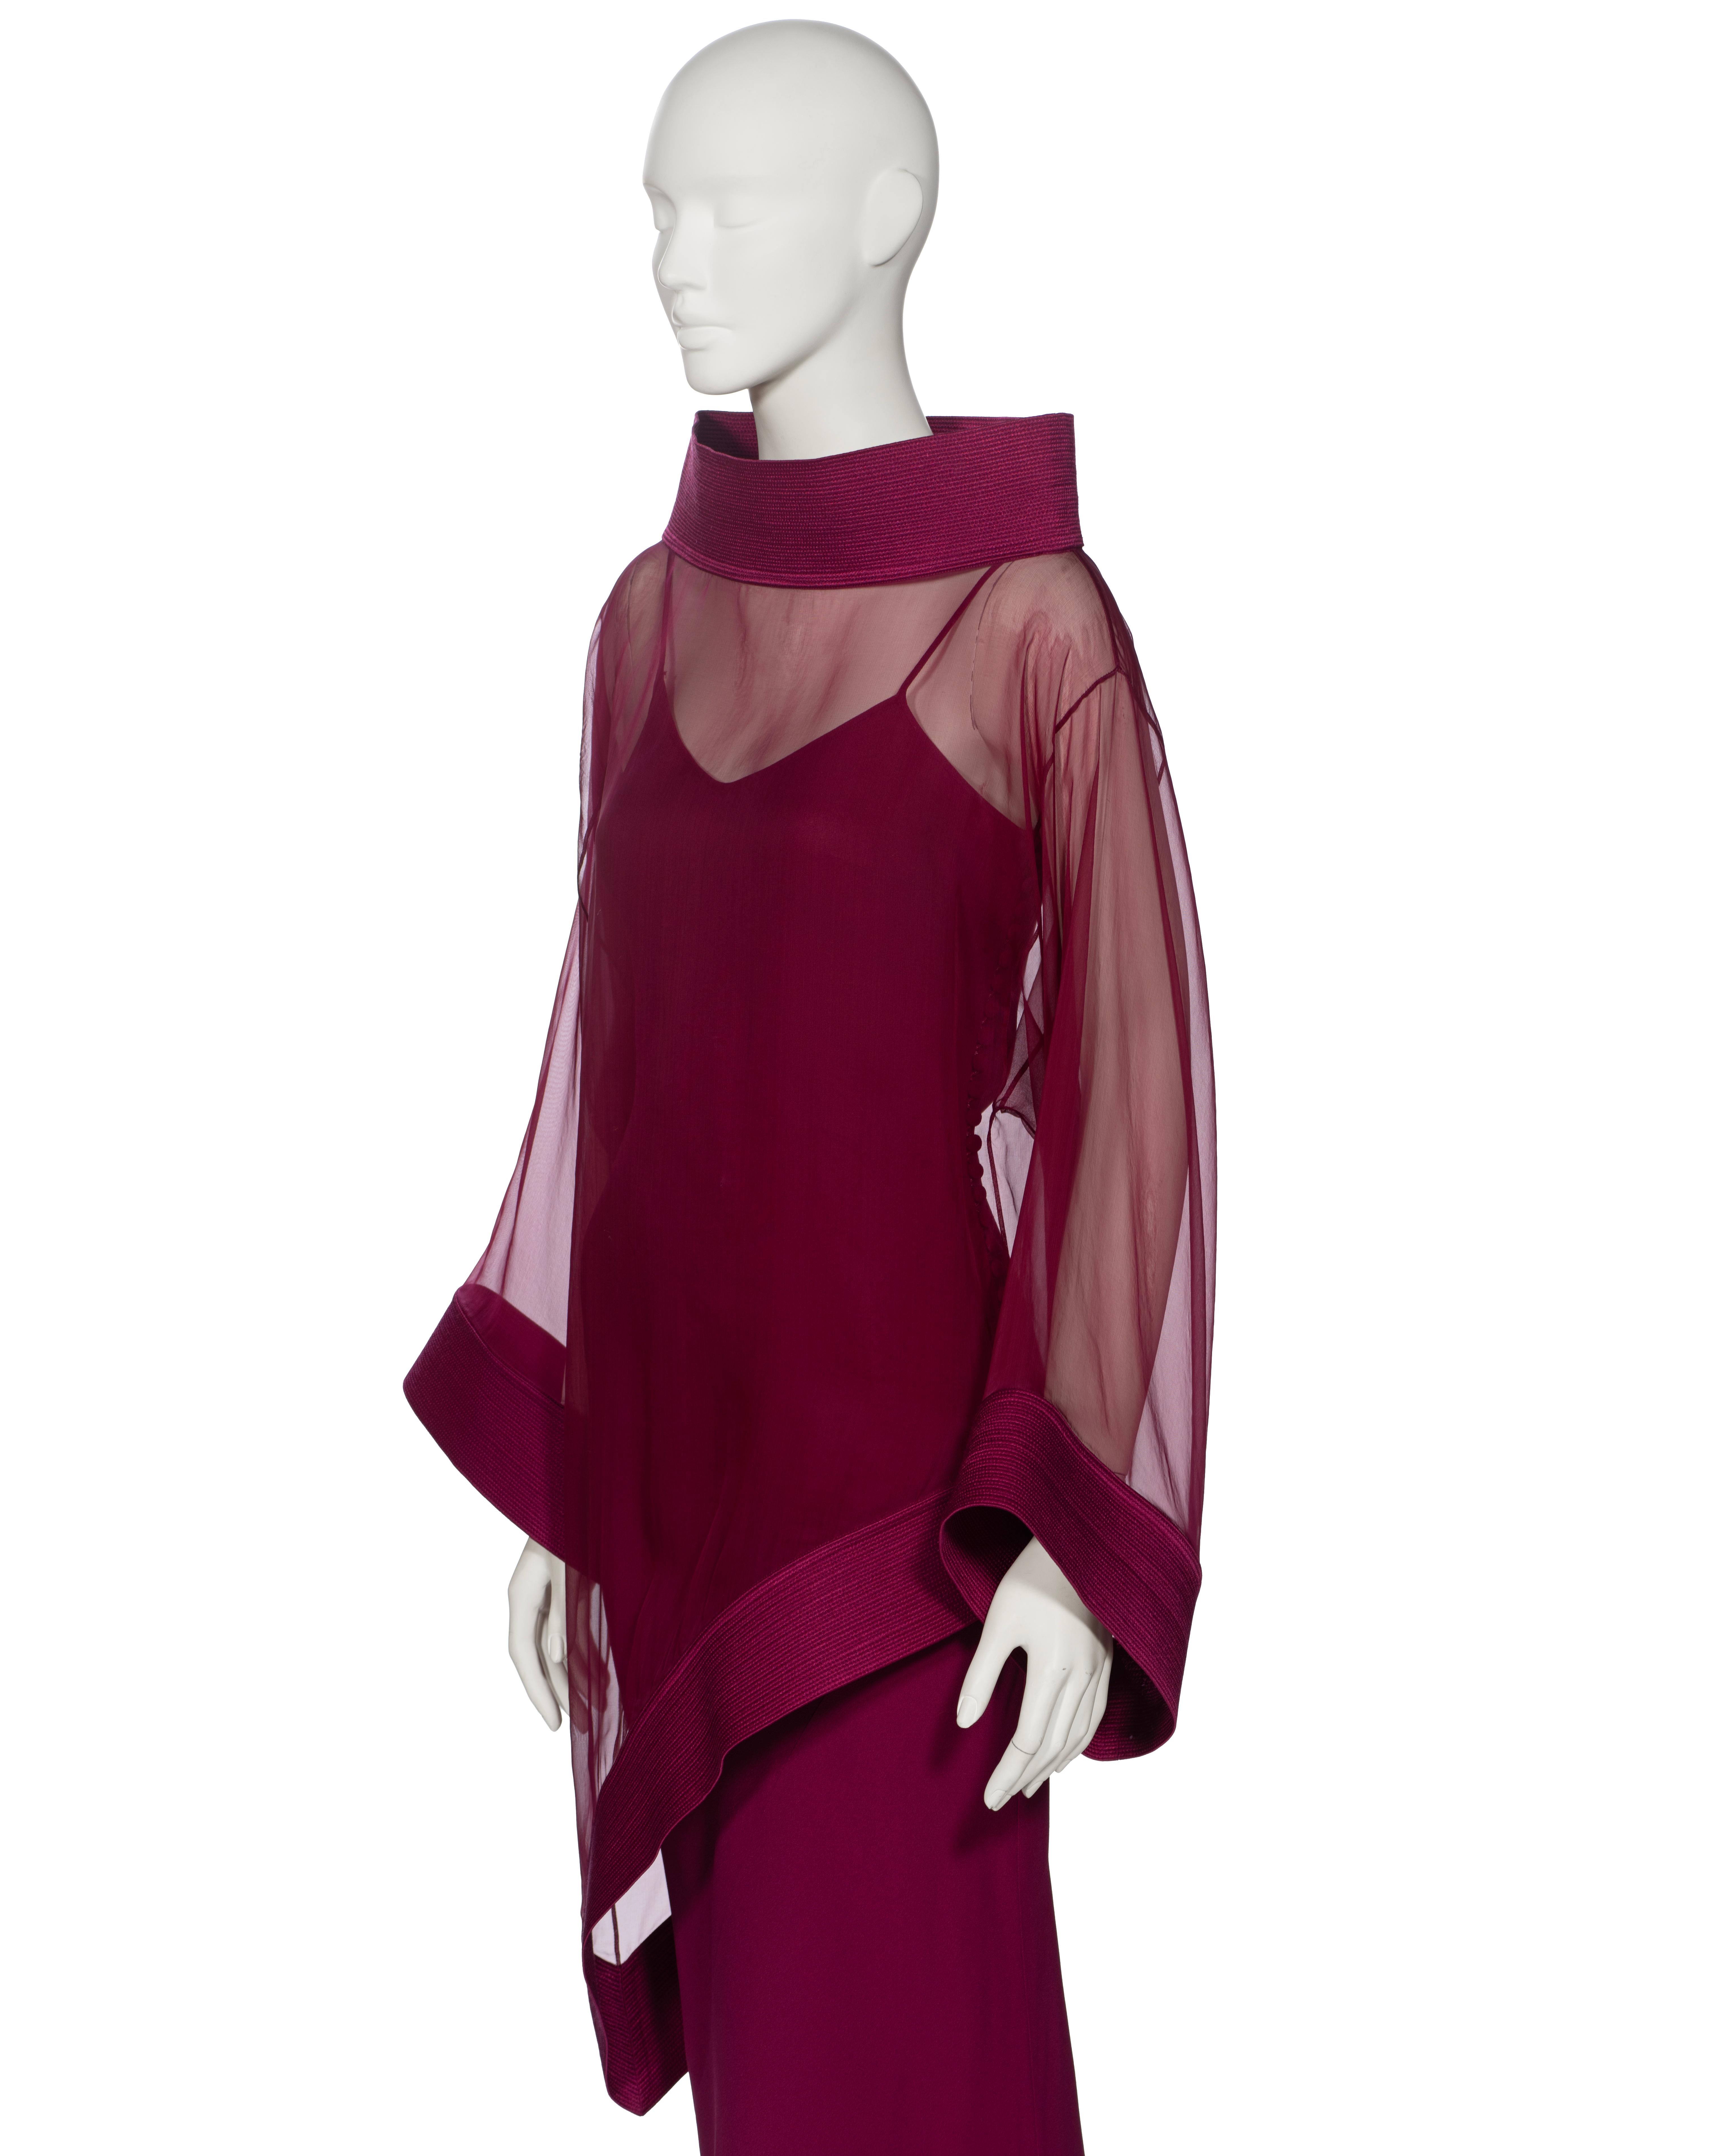 Christian Dior by John Galliano Claret Evening Dress and Tunic Ensemble, fw 1999 For Sale 5